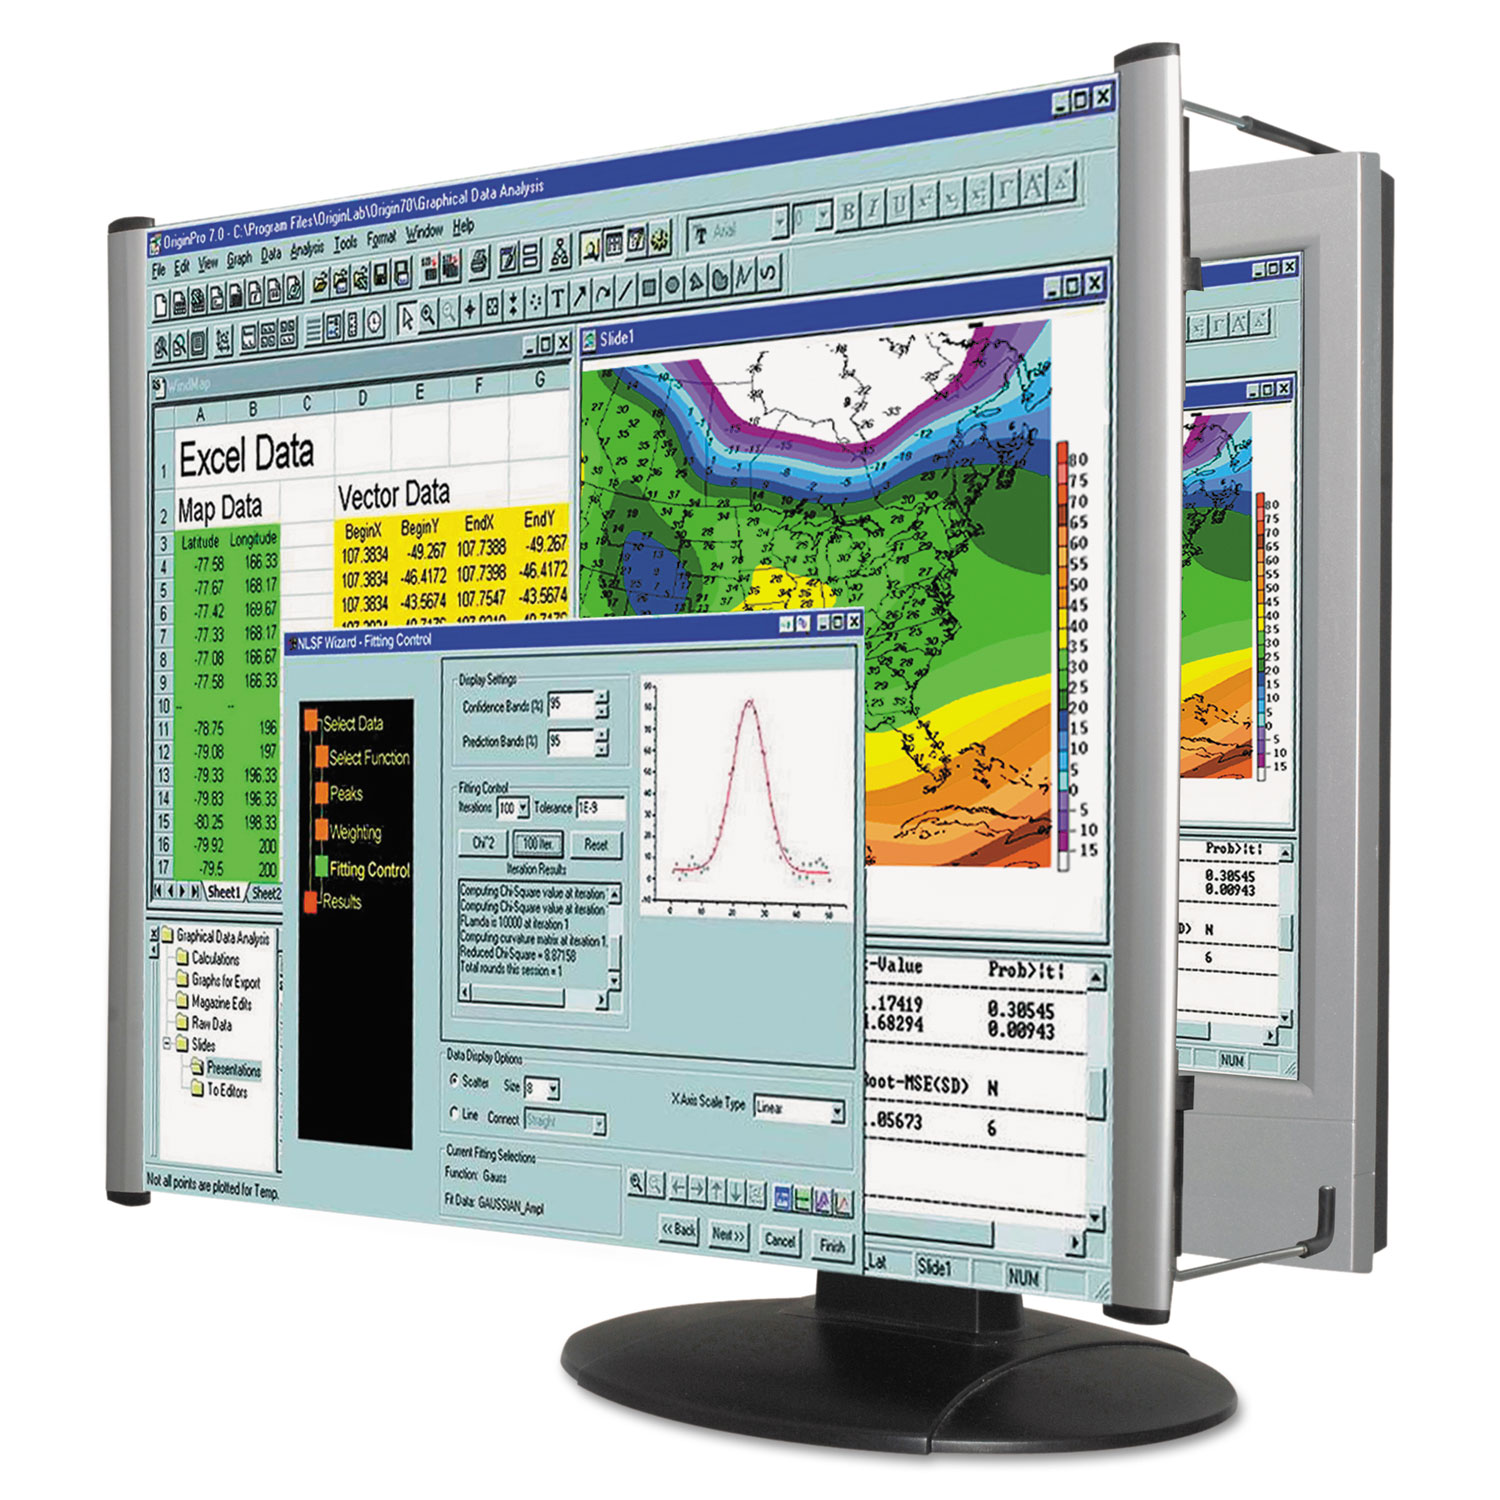 LCD Monitor Magnifier Filter, Fits 22 Widescreen LCD, 16:9/16:10 Aspect Ratio